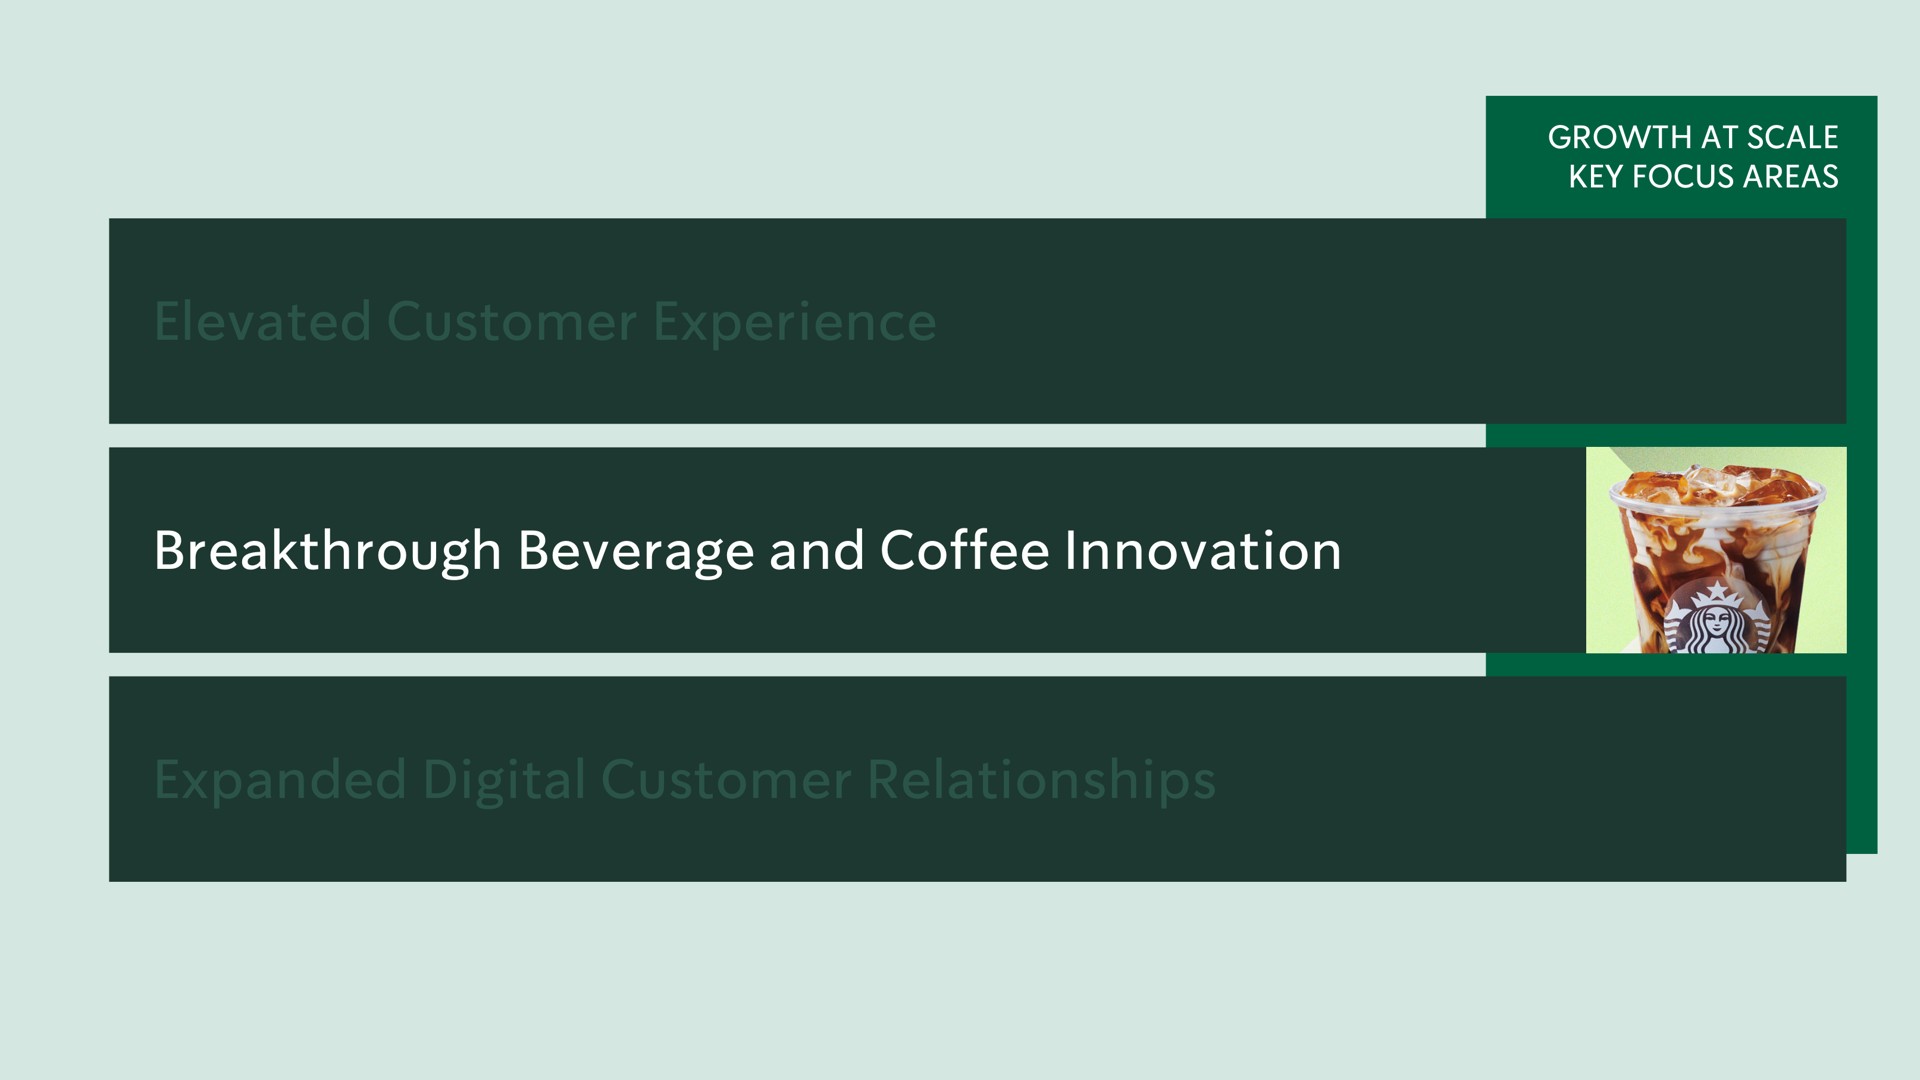 growth at scale key focus areas elevated customer experience breakthrough beverage and coffee innovation expanded digital customer relationships | Starbucks